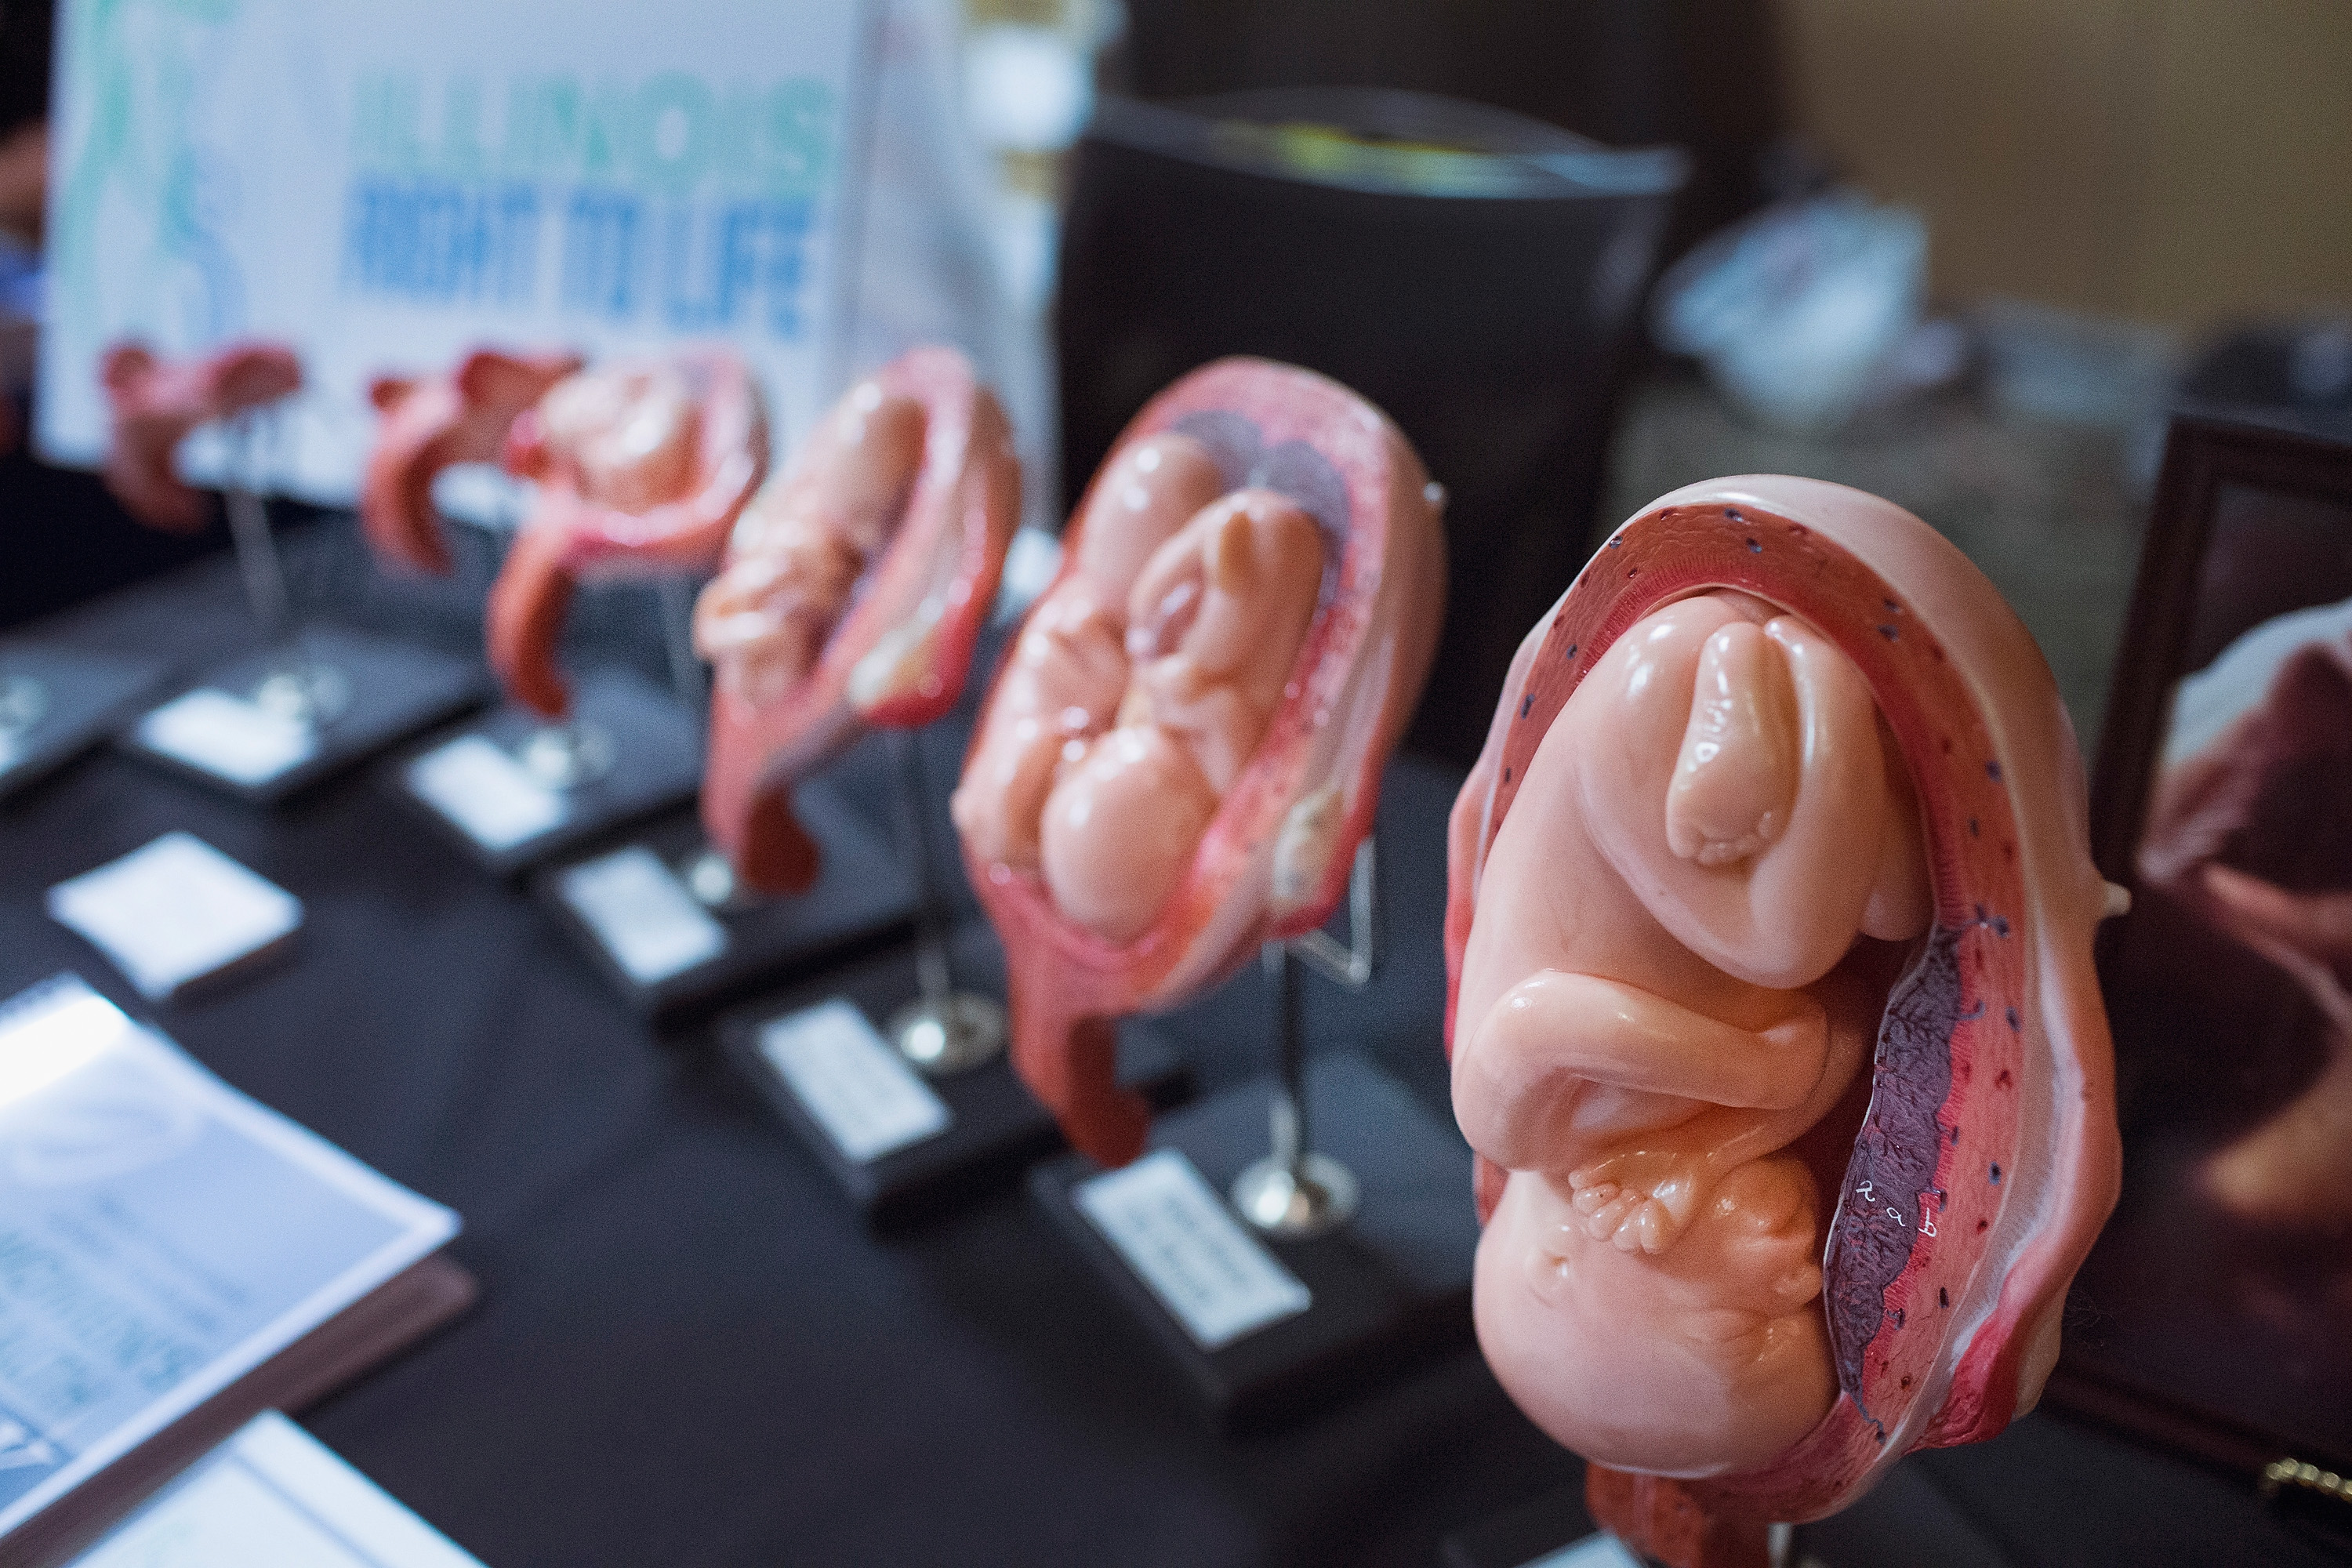 Stages of a fetus are displayed at the Illinois Right To Life a table 